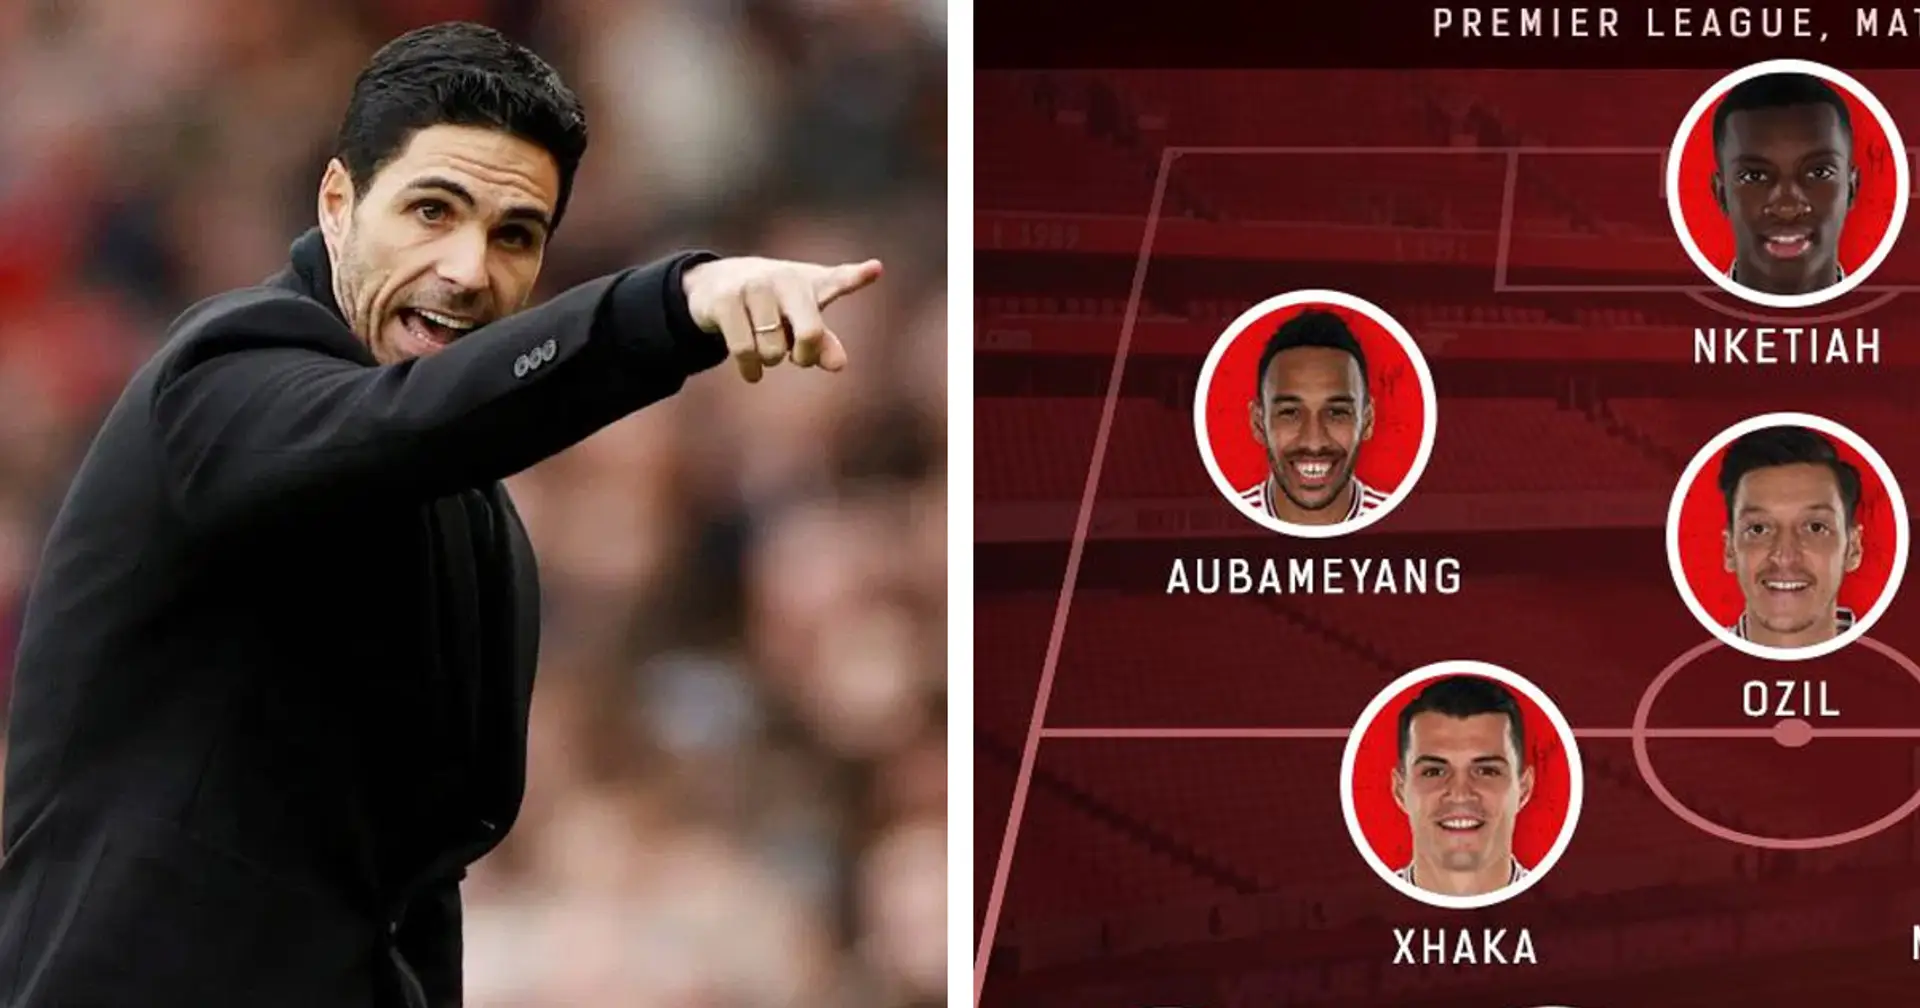 Man City vs Arsenal preview: line-ups, score predictions, key stats and more